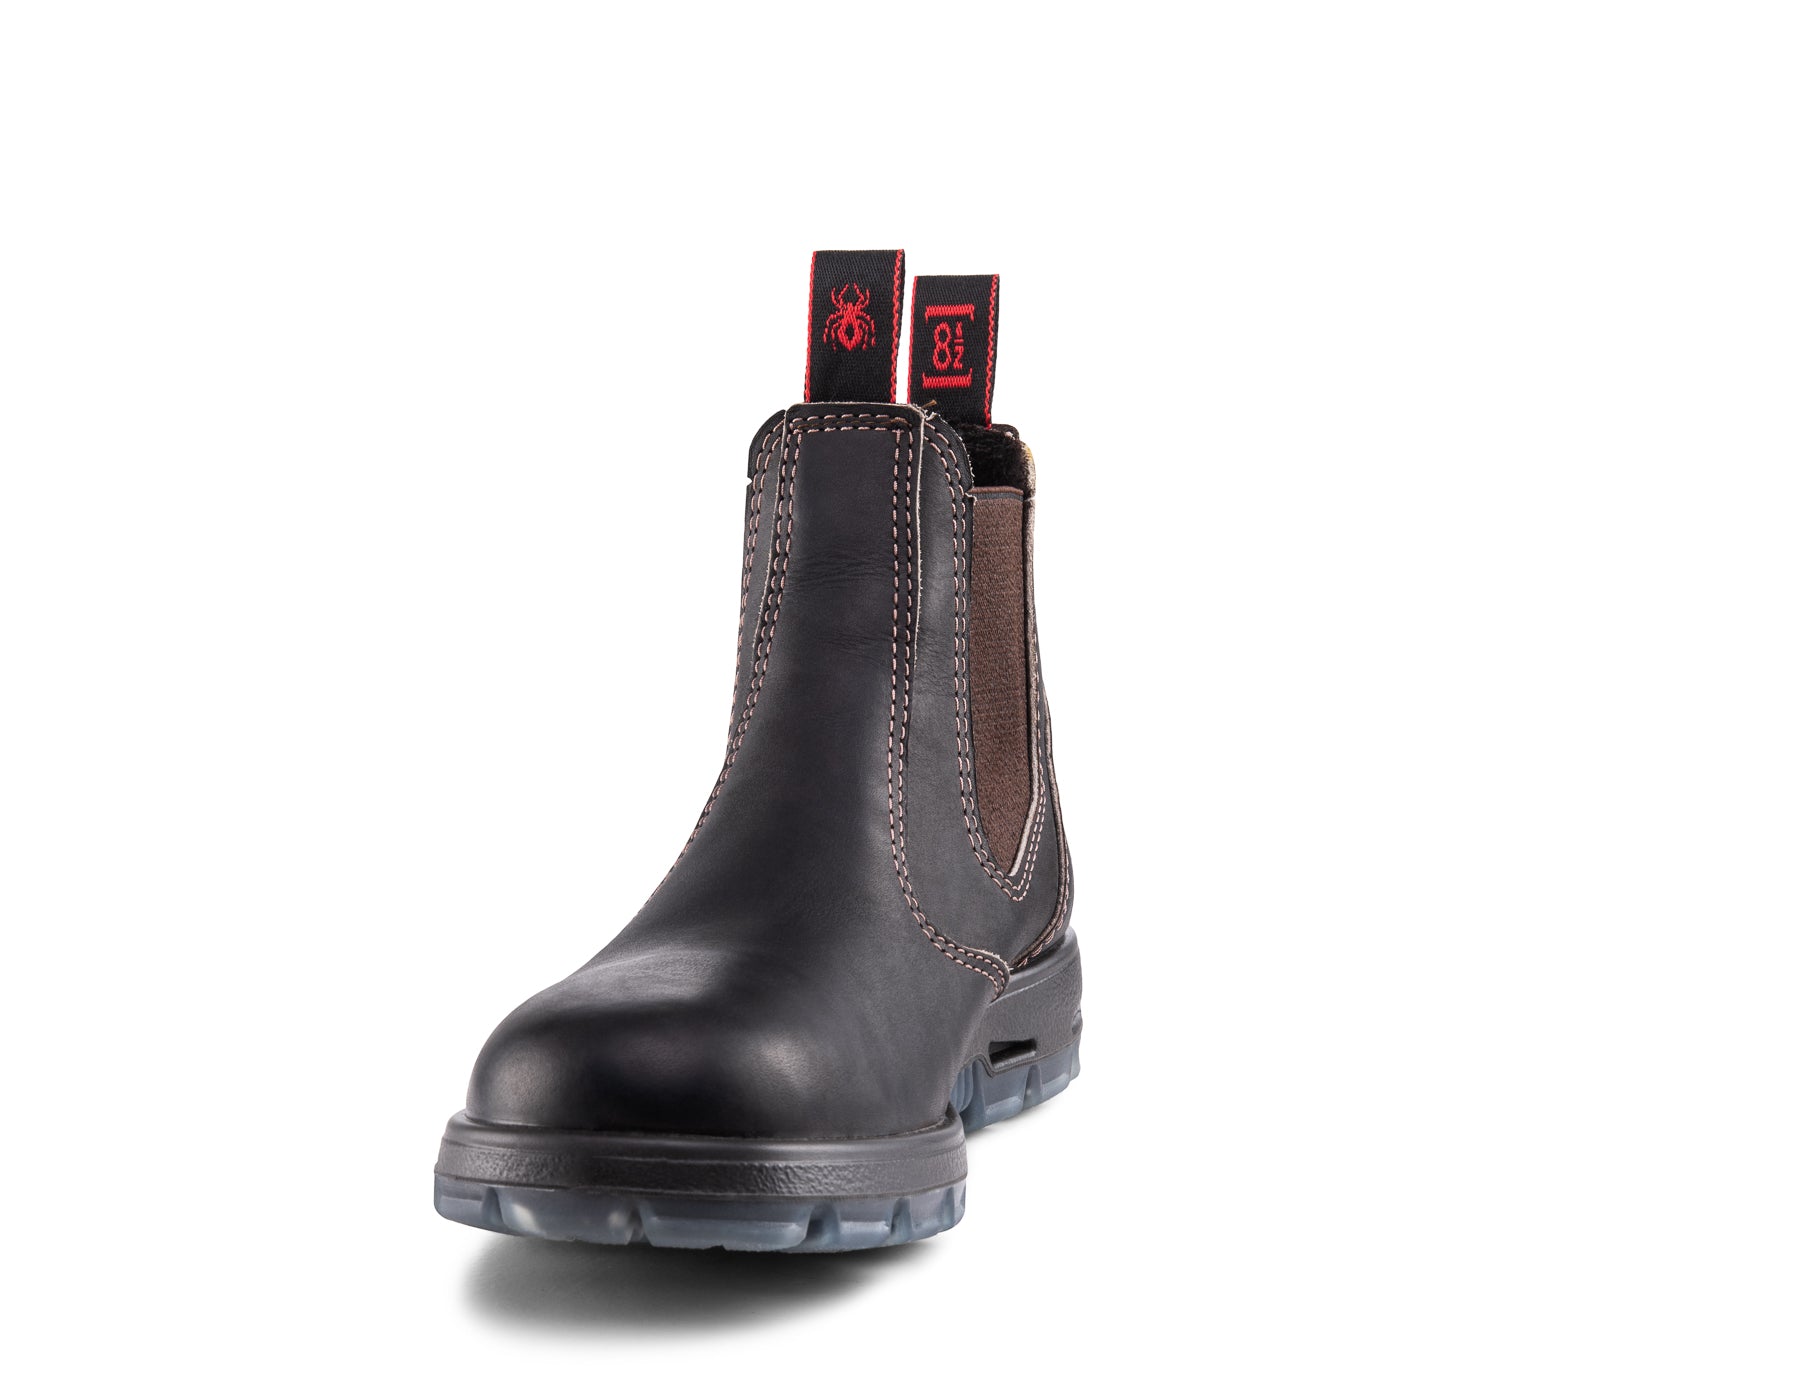 redback boots sizing guide